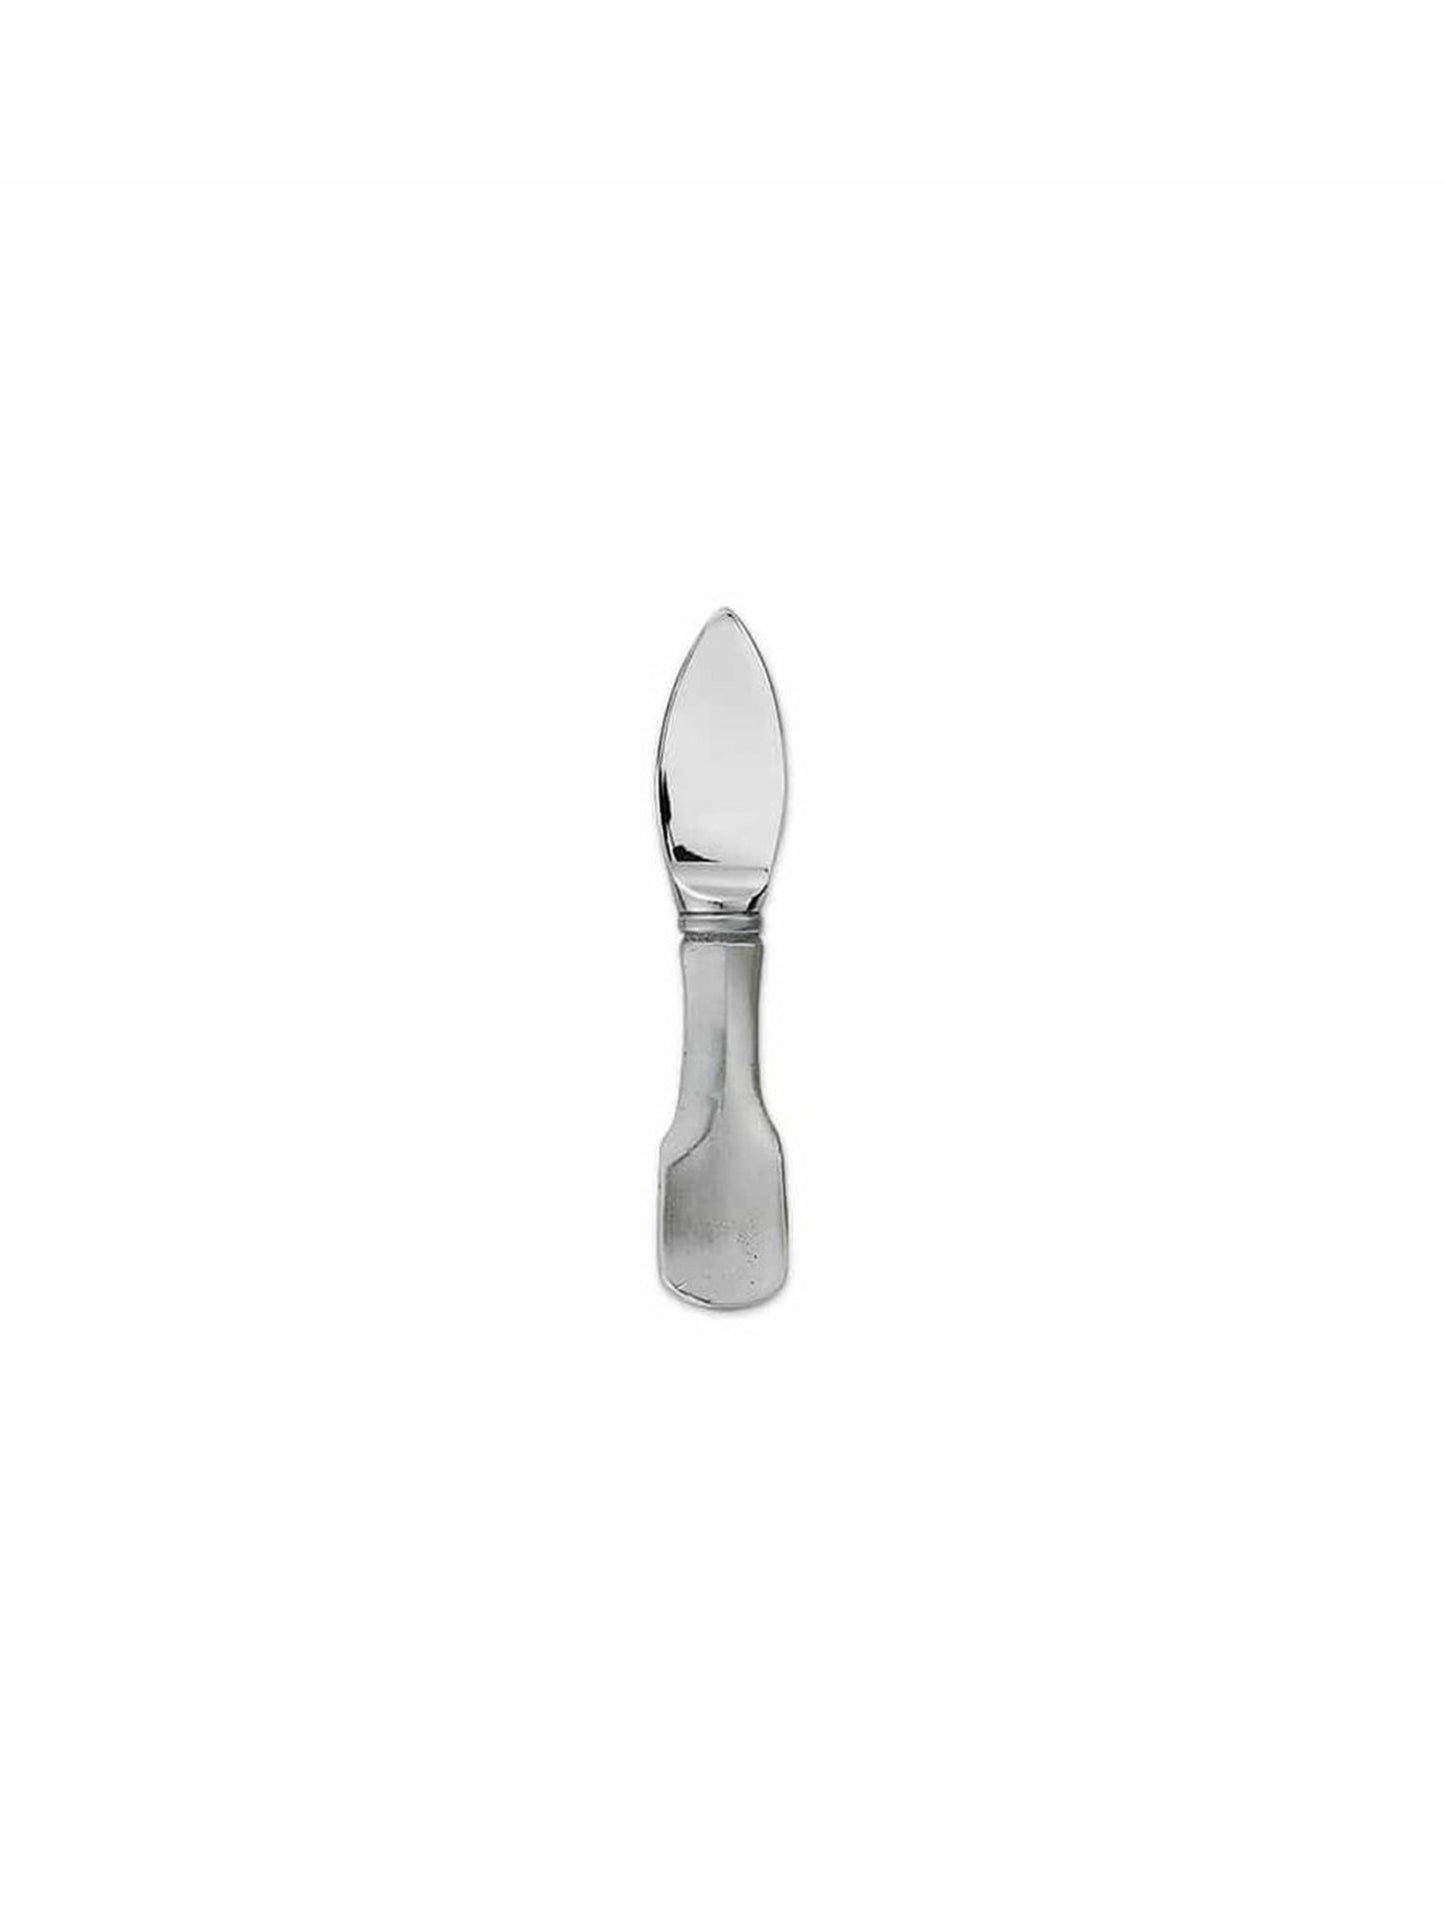 Match Pewter Olivia Parmesan Cheese Knife